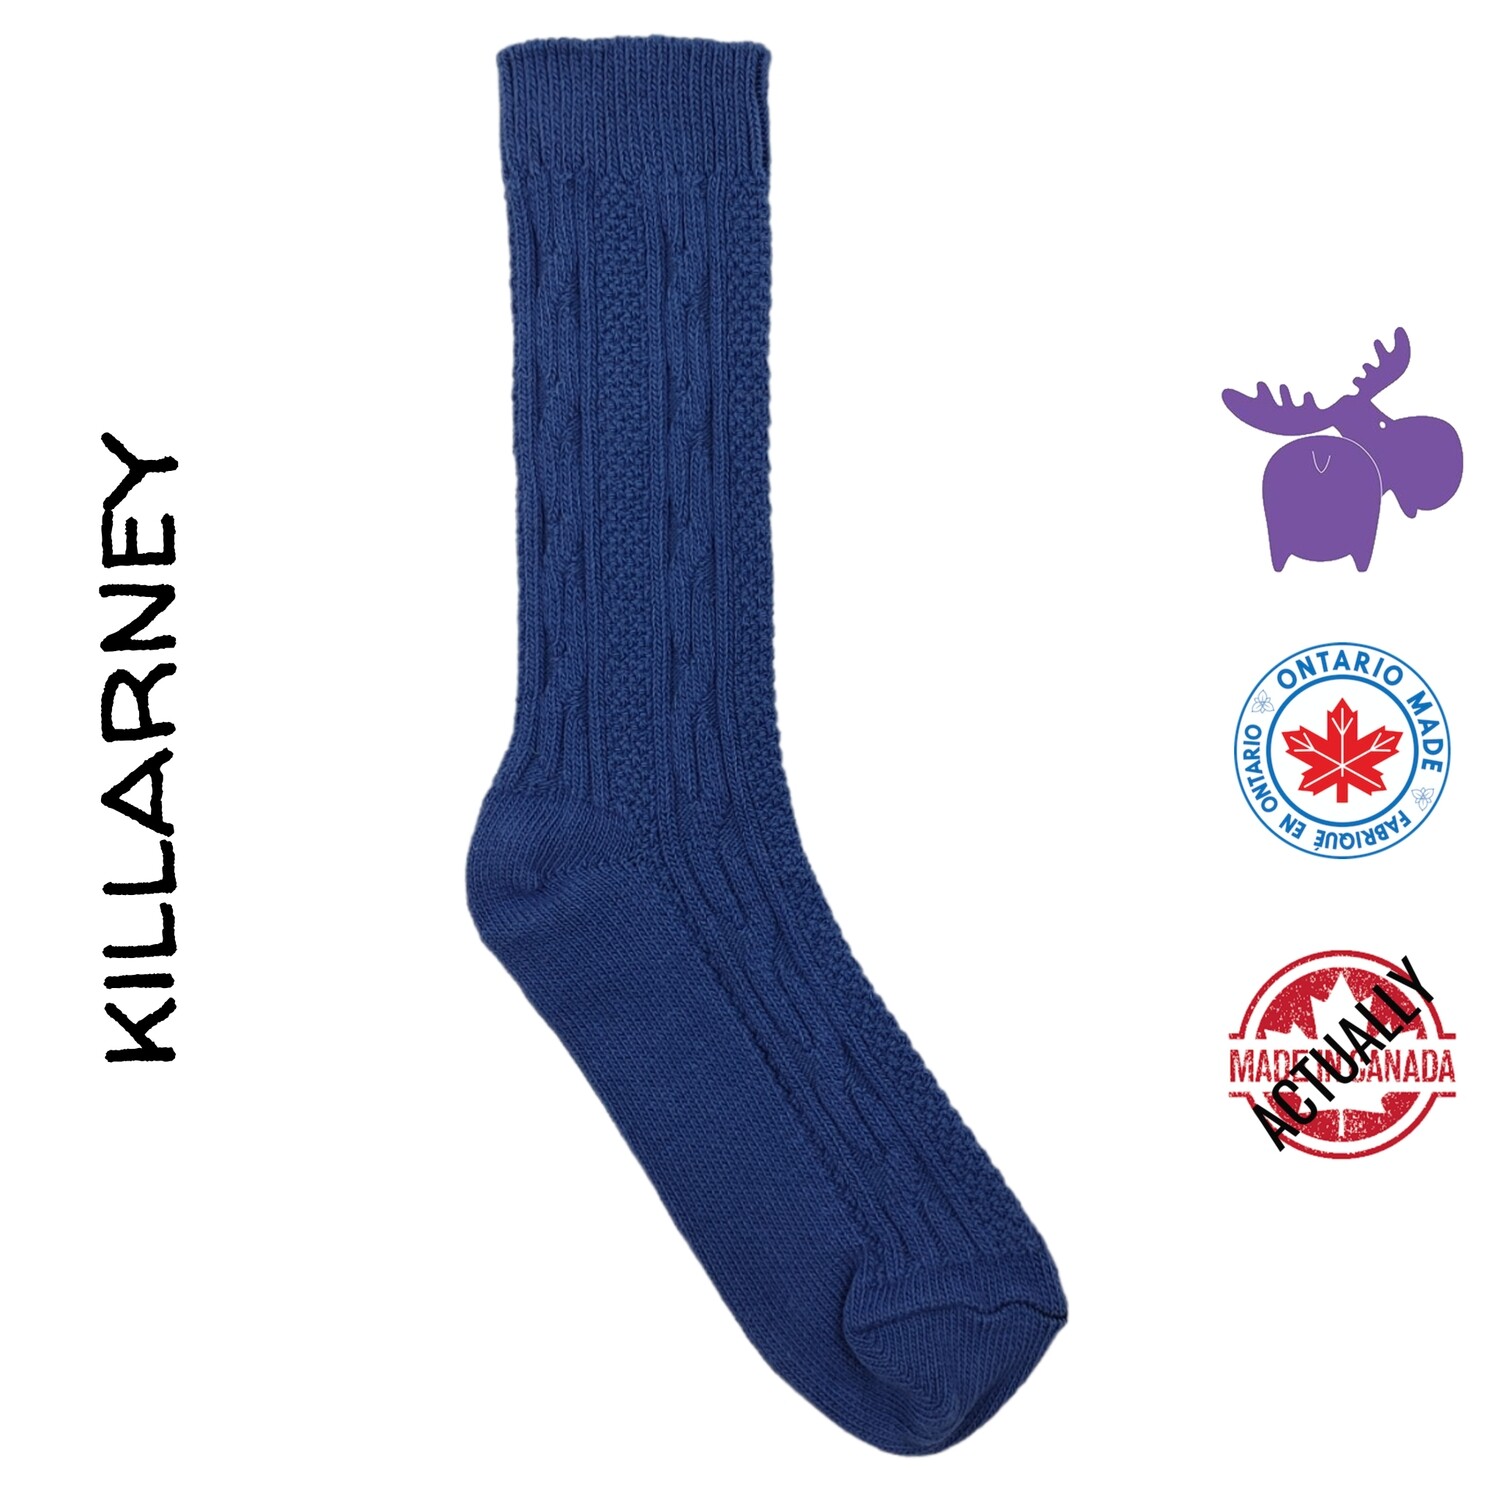 Killarney Cable Knit Crew Sock in 3 colors - Large size